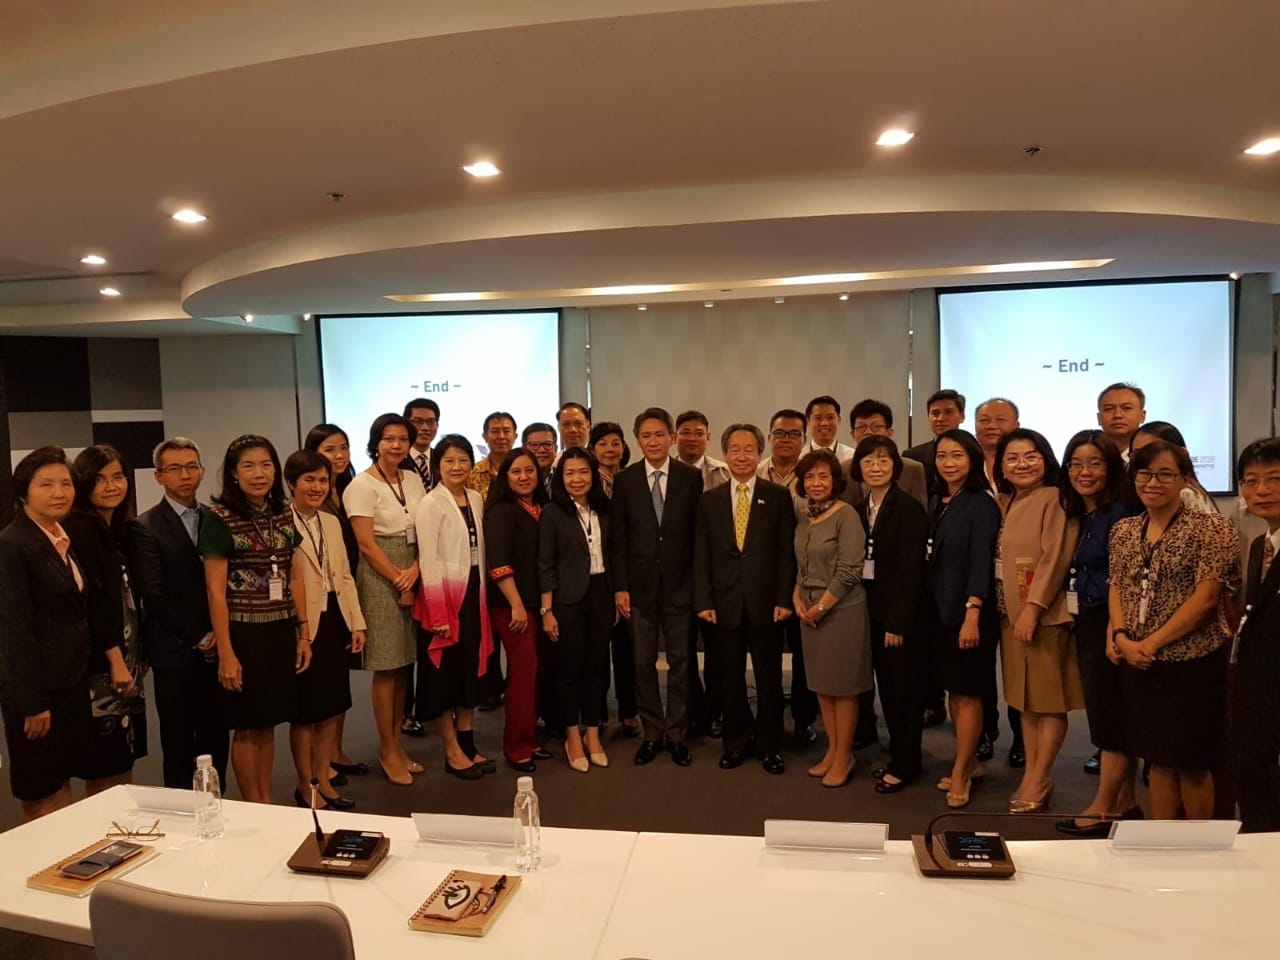 Foreign Affairs Executive Programme organised by the DVIFA for senior Thai officials and diplomats